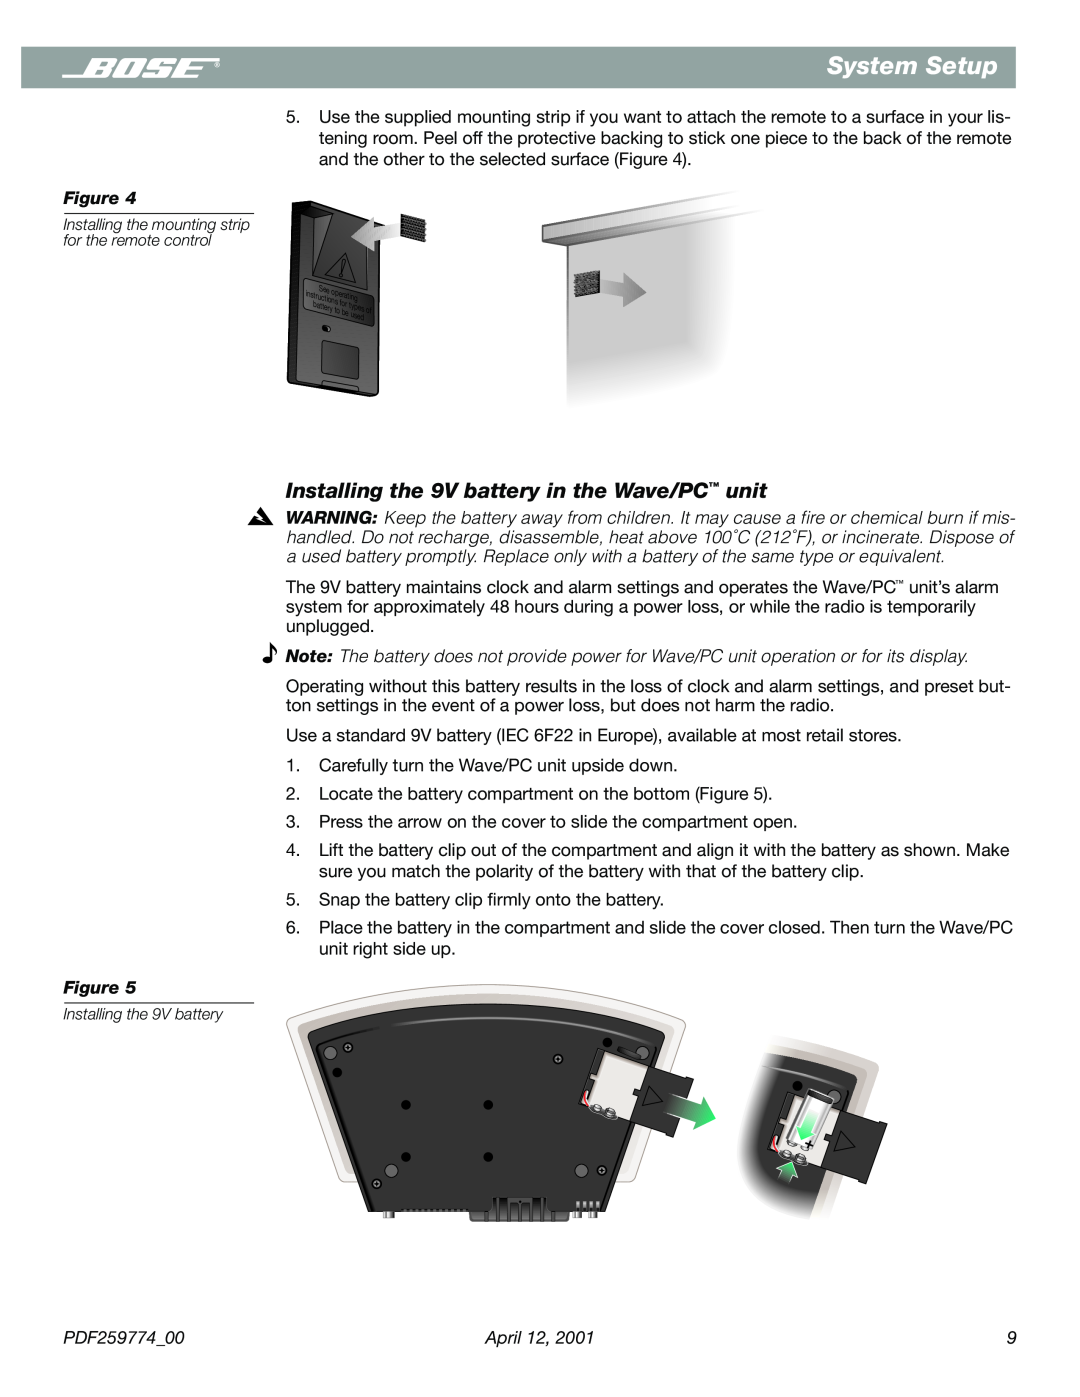 Bose PDF259774_00 manual Installing the 9V battery in the Wave/PC unit, System Setup 